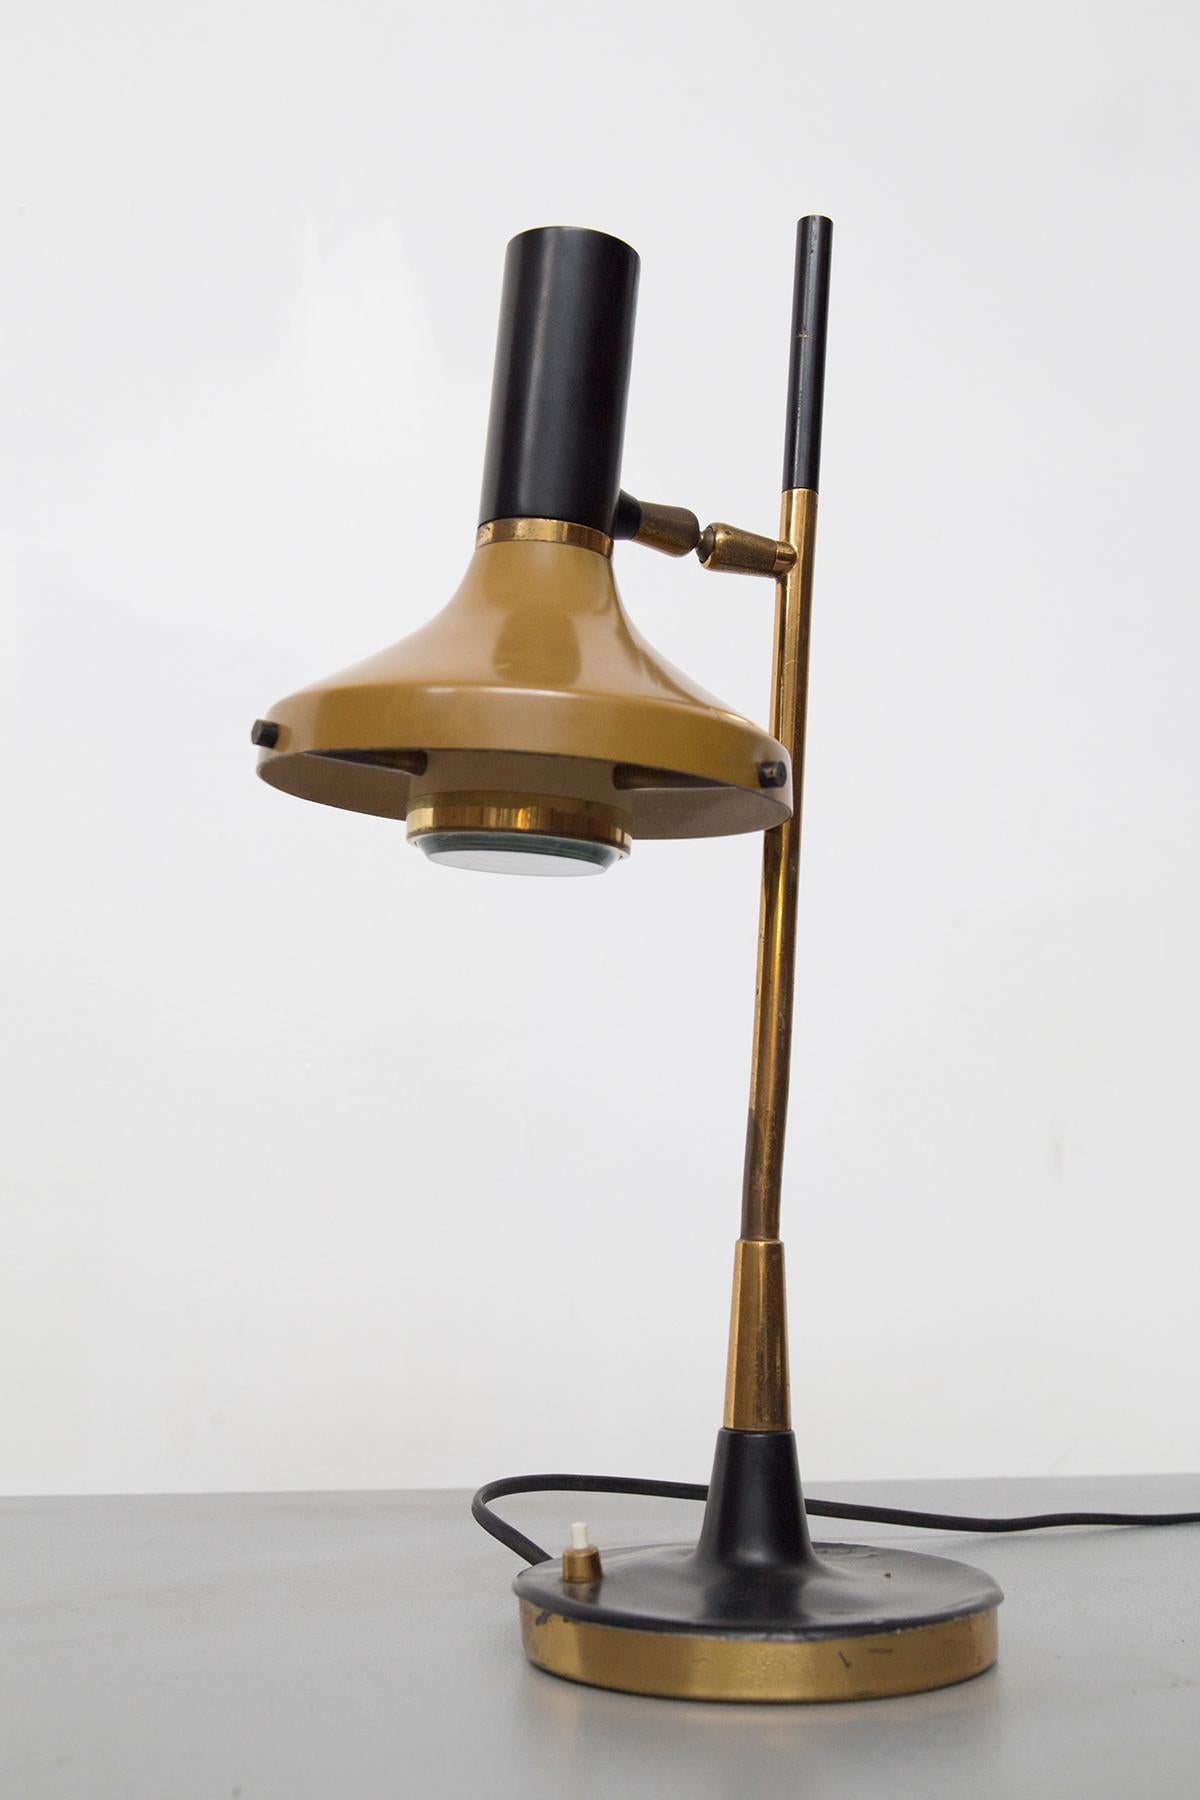 Fantastic vintage table lamp model 533 designed by the great Oscar Torlasco for the fine manufacture Lumi in the 1950s.
The lamp has a round metal and brass base, very beautiful, from the center of which rises the black metal and gilt brass stem in